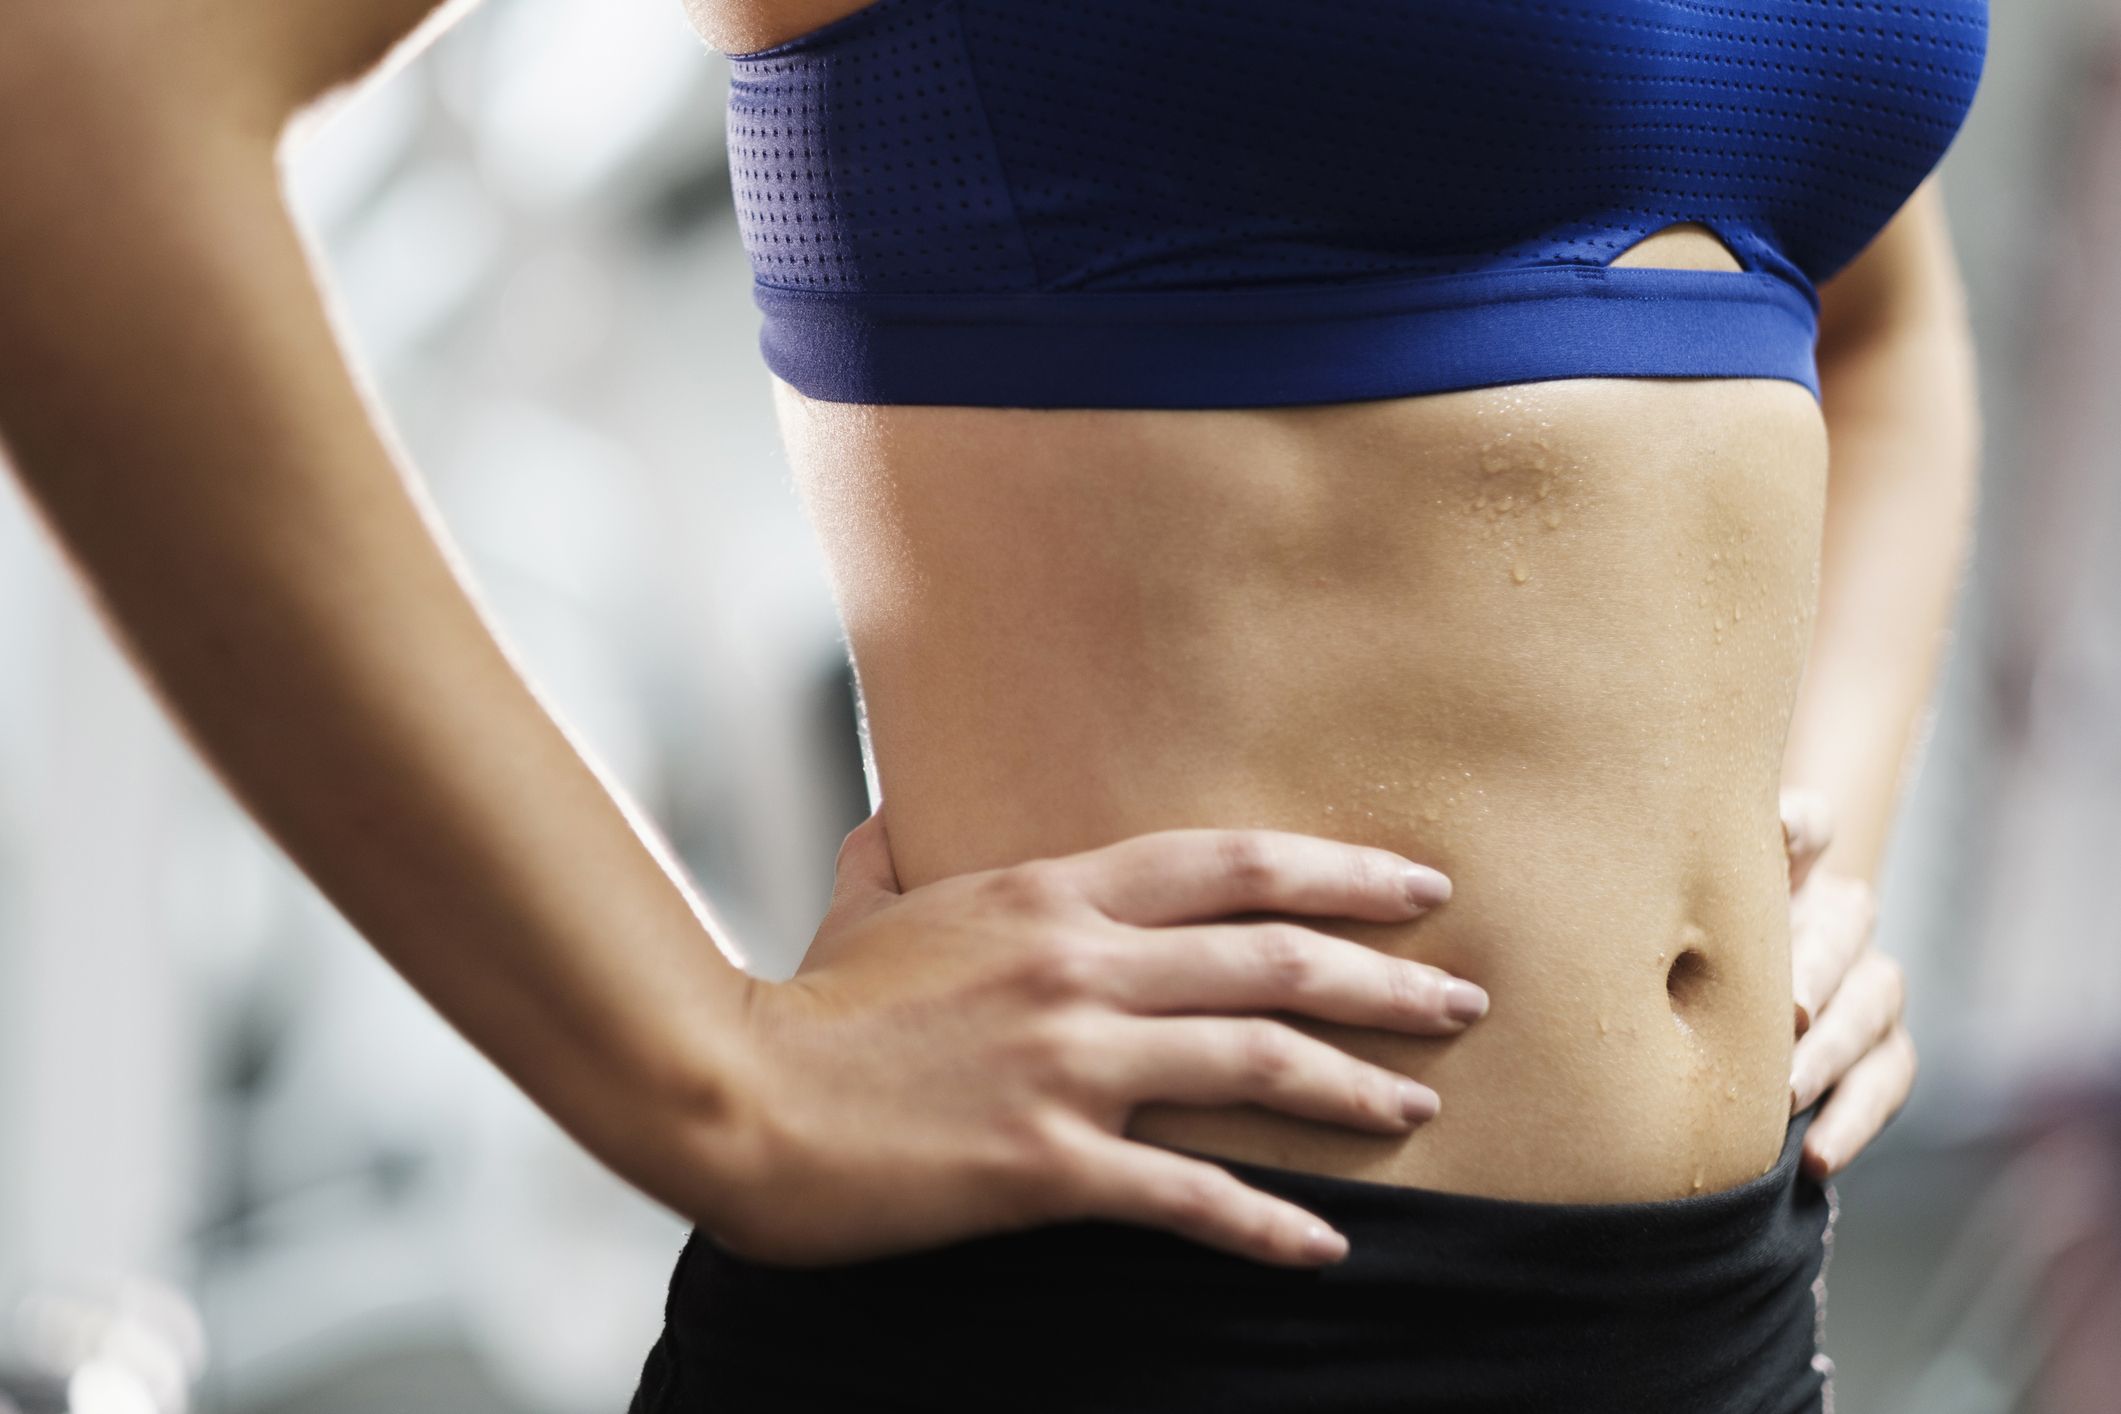 The 2 Best Exercises to Help with Bloating, According to a Personal Trainer